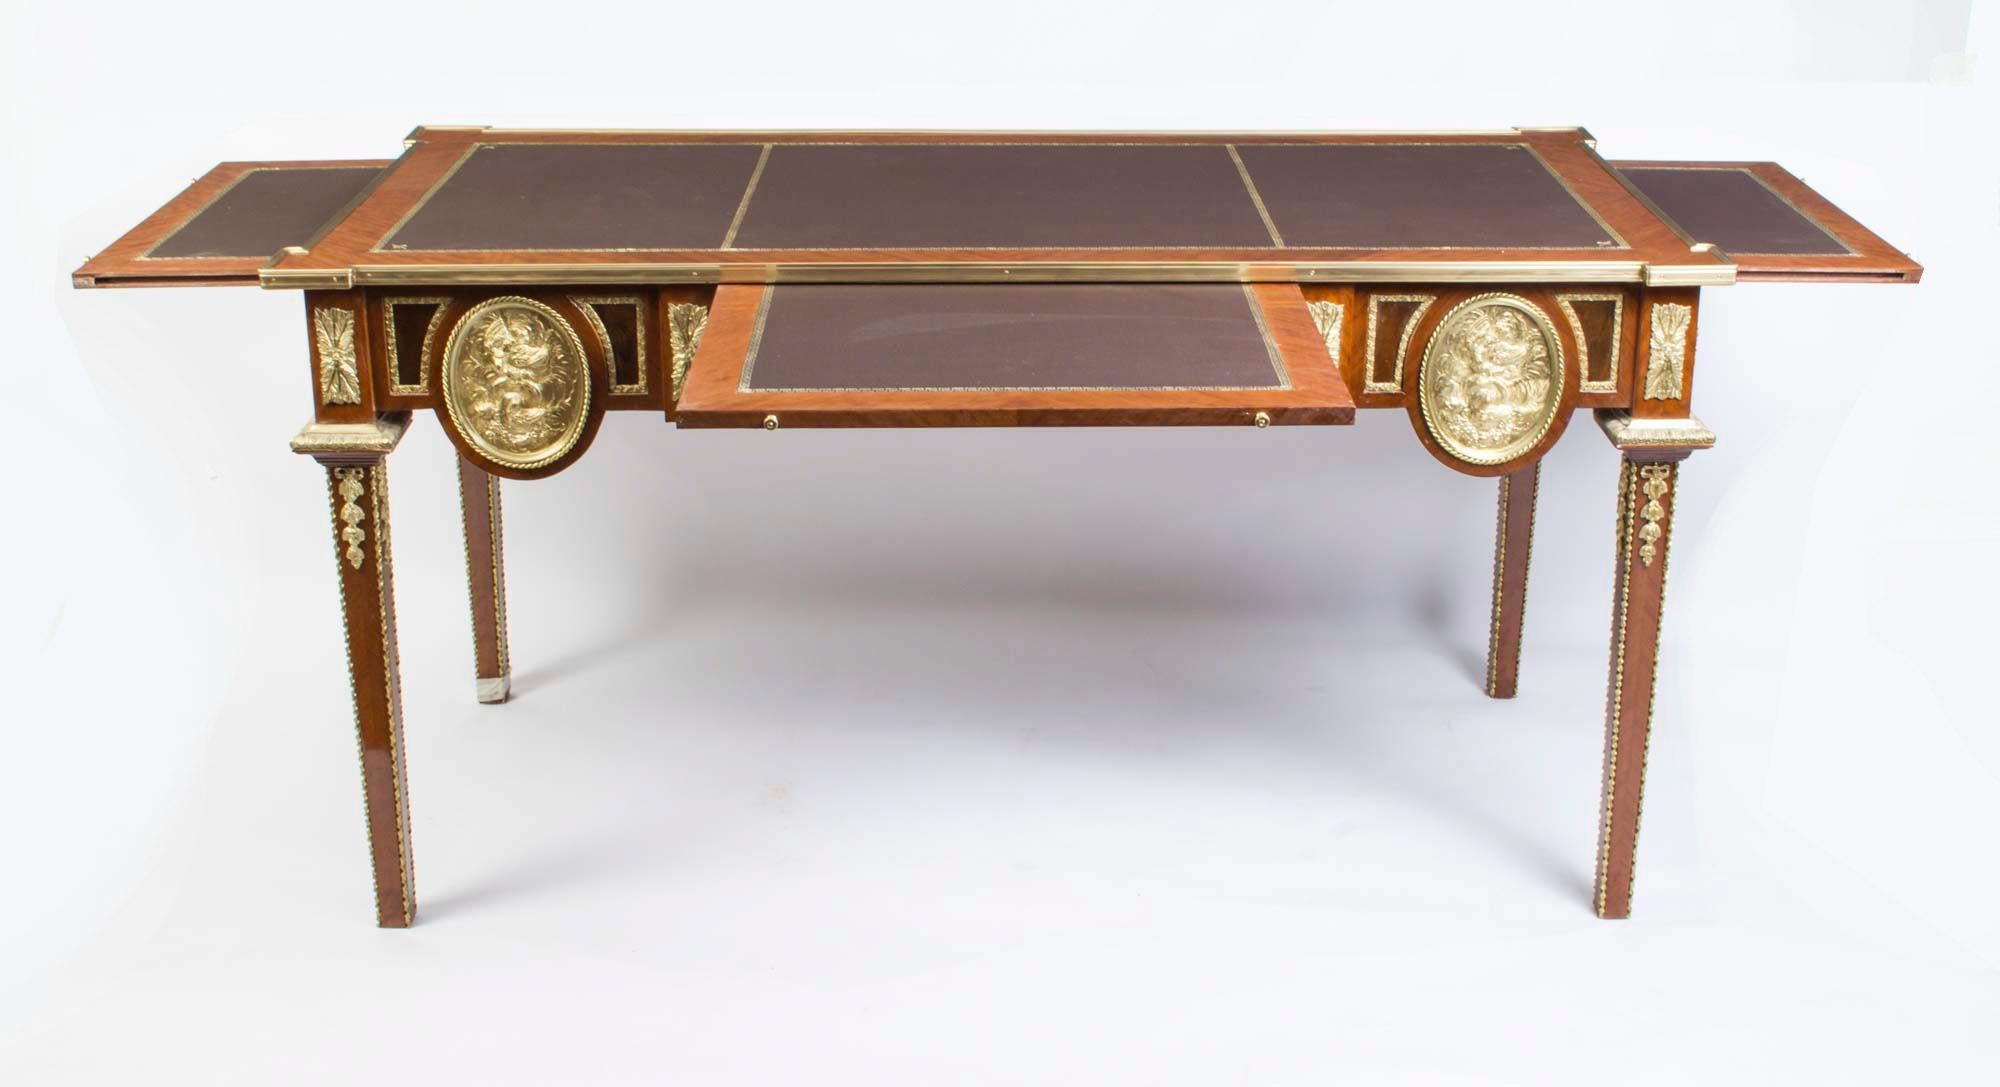 Leather Vintage Empire Style Walnut Ormolu Mounted Writing Table 20th C